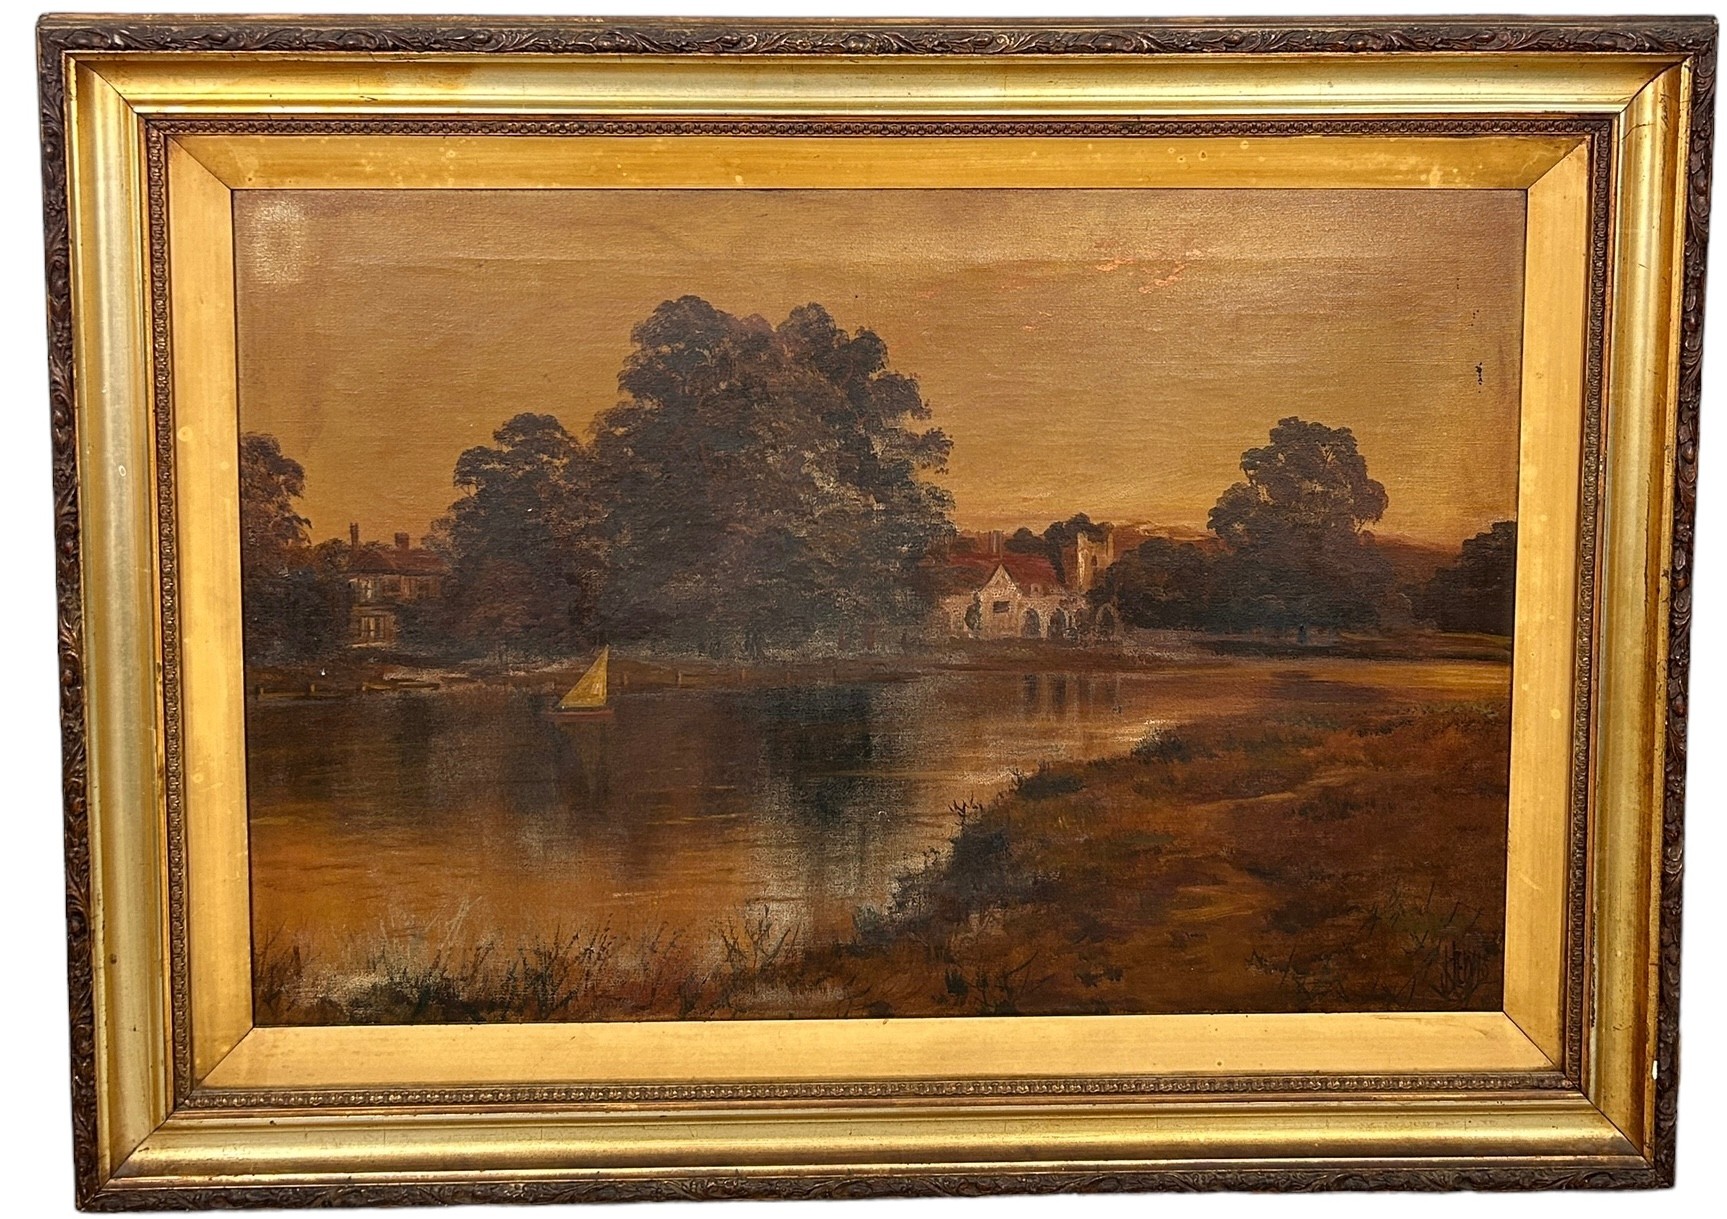 JAMES ISIAH LEWIS (1861-1934): AN OIL ON CANVAS PAINTING DEPICTING A RIVER SCENE WITH CHURCH, 76.5cm